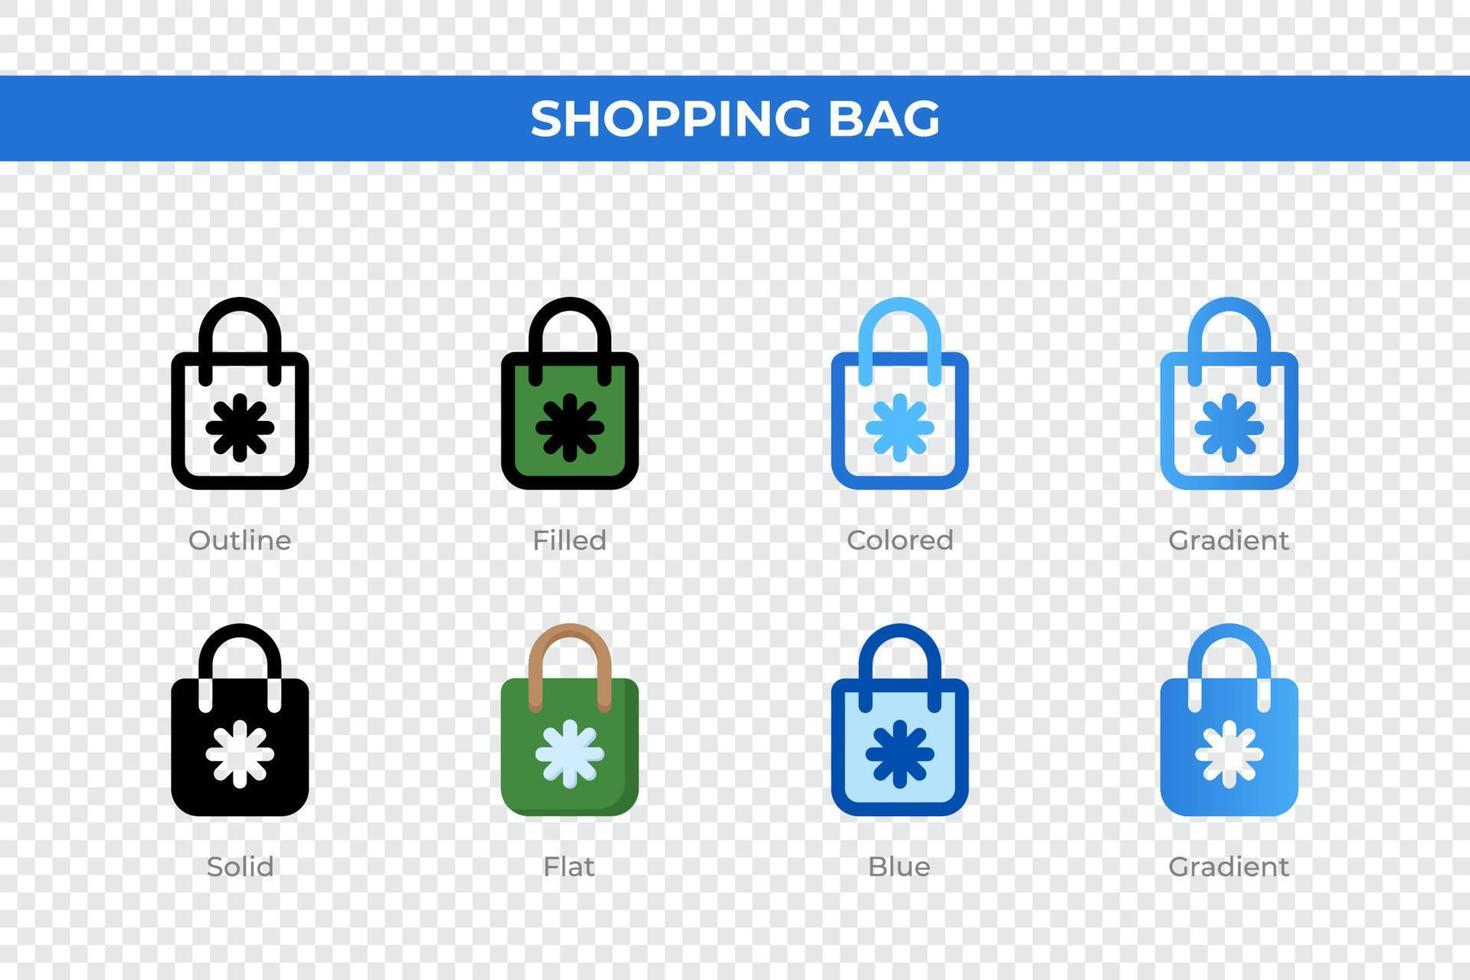 Shopping bag icons in different style. Shopping bag icons set. Holiday symbol. Different style icons set. Vector illustration